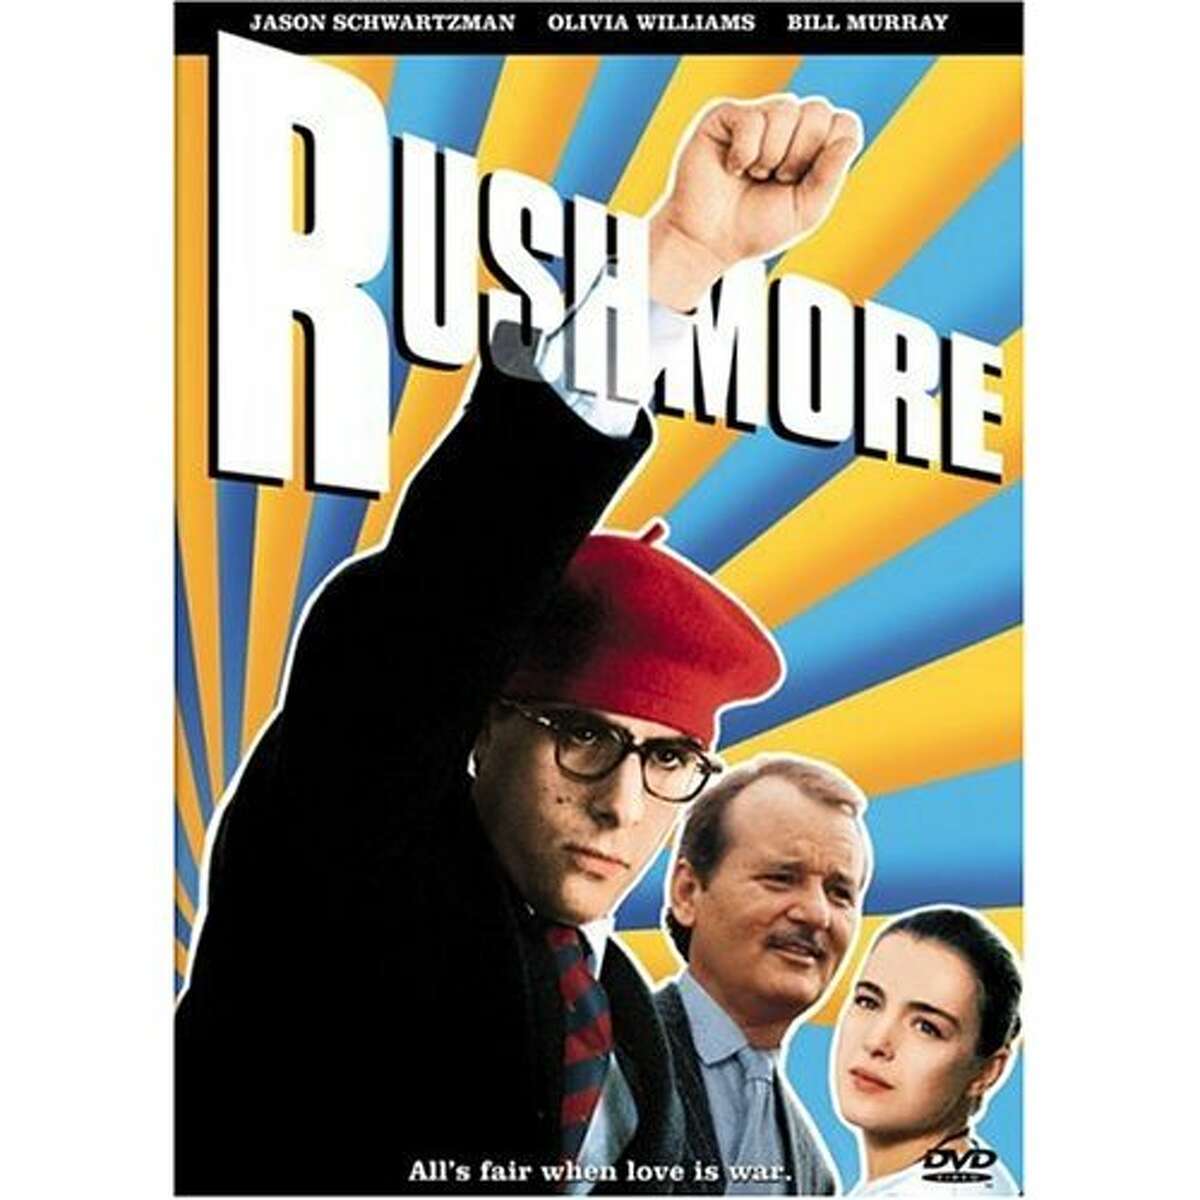 Jason Schwartzman will be at the new Alamo Drafthouse at Vintage Park on Monday, Feb. 11 to attend a screening of "Rushmore."